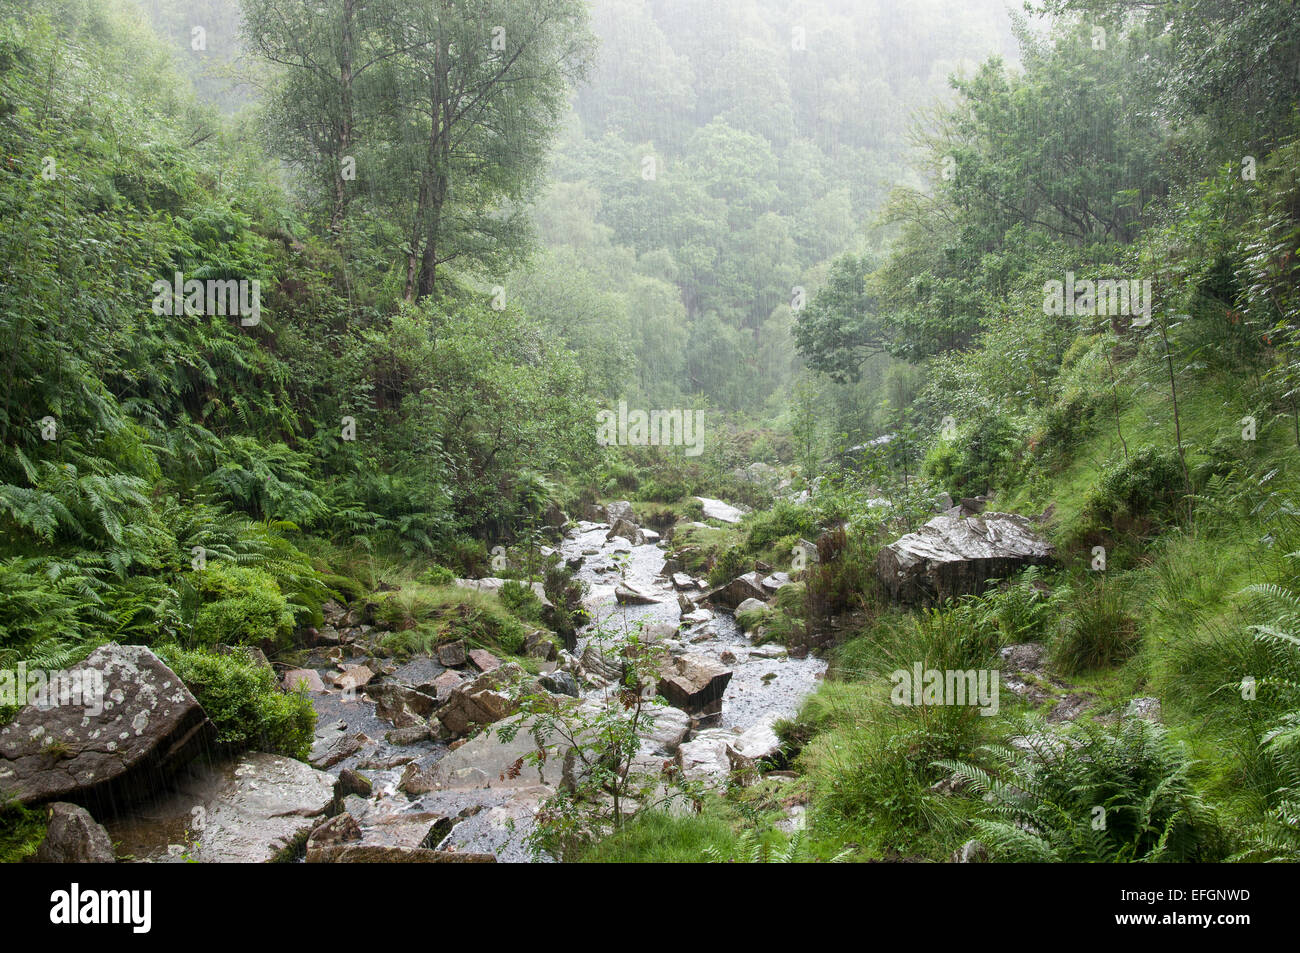 Heavy summer rain at Middle Black Clough in the Peak District, Derbyshire. A torrential downpour in a green wooded valley. Stock Photo